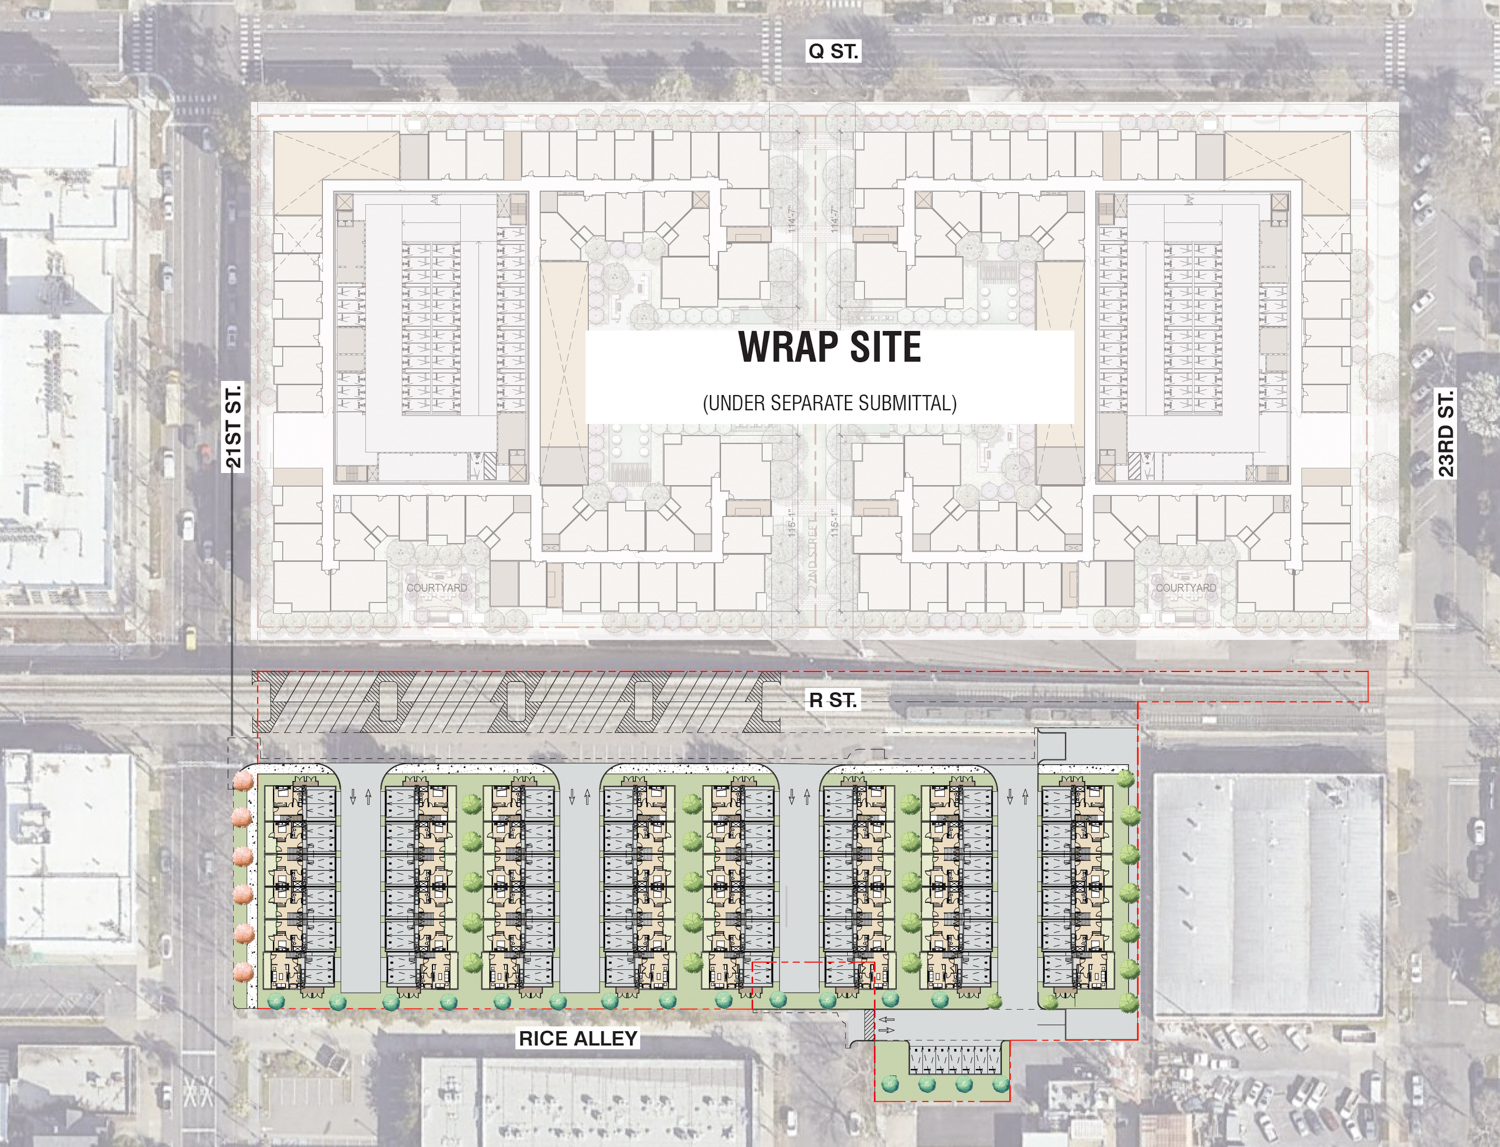 1801 21st Street site map, illustration by TCA Architects